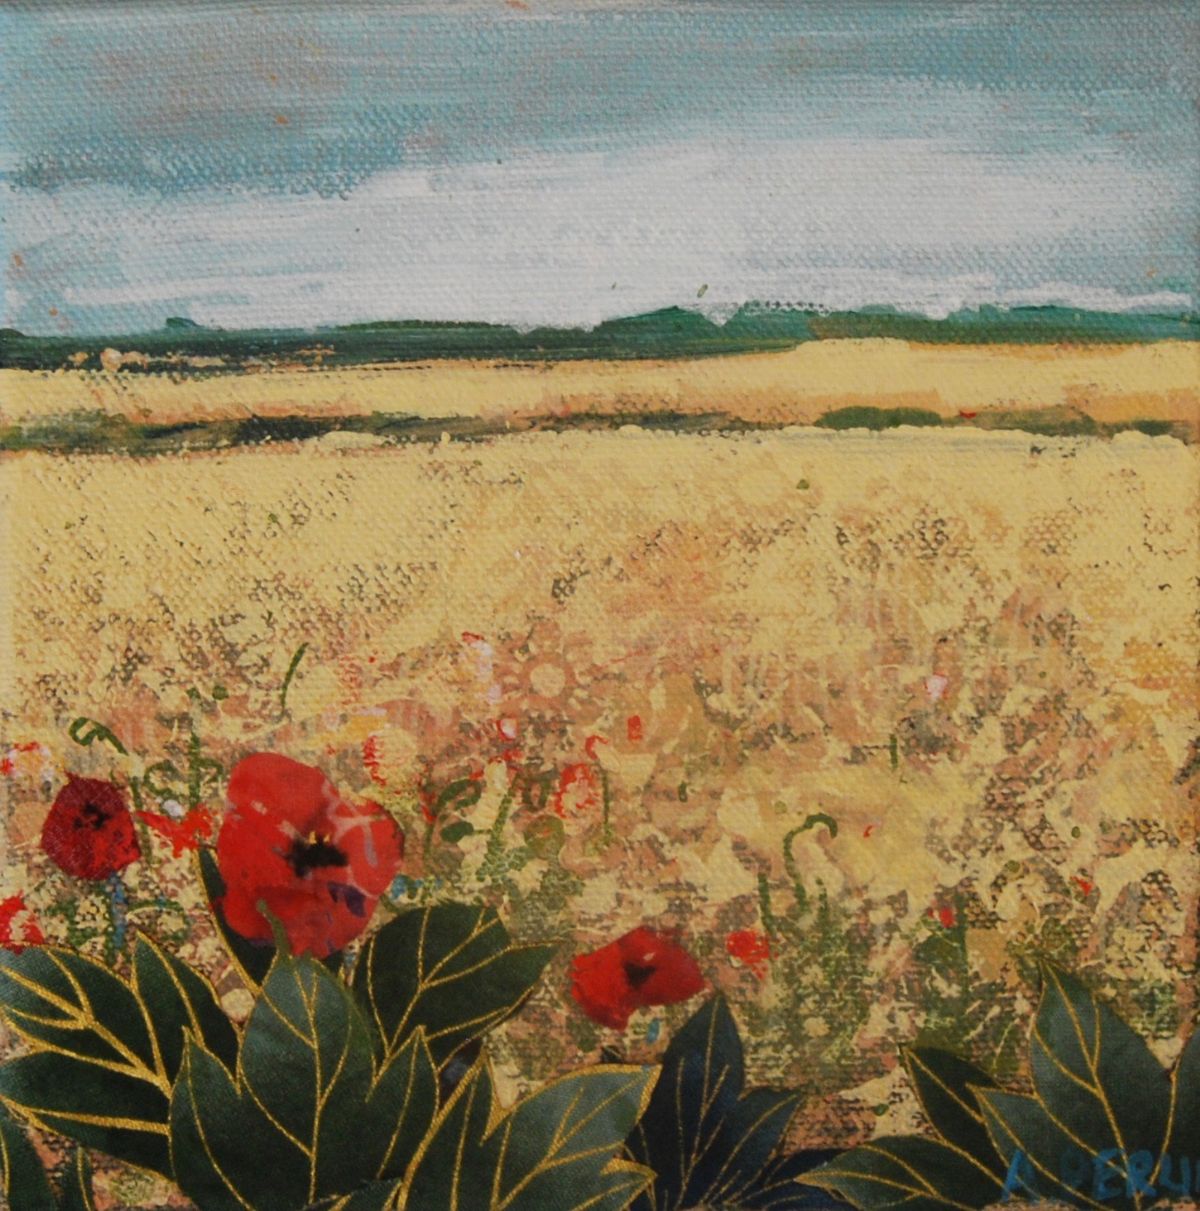 Cornfield and Poppies